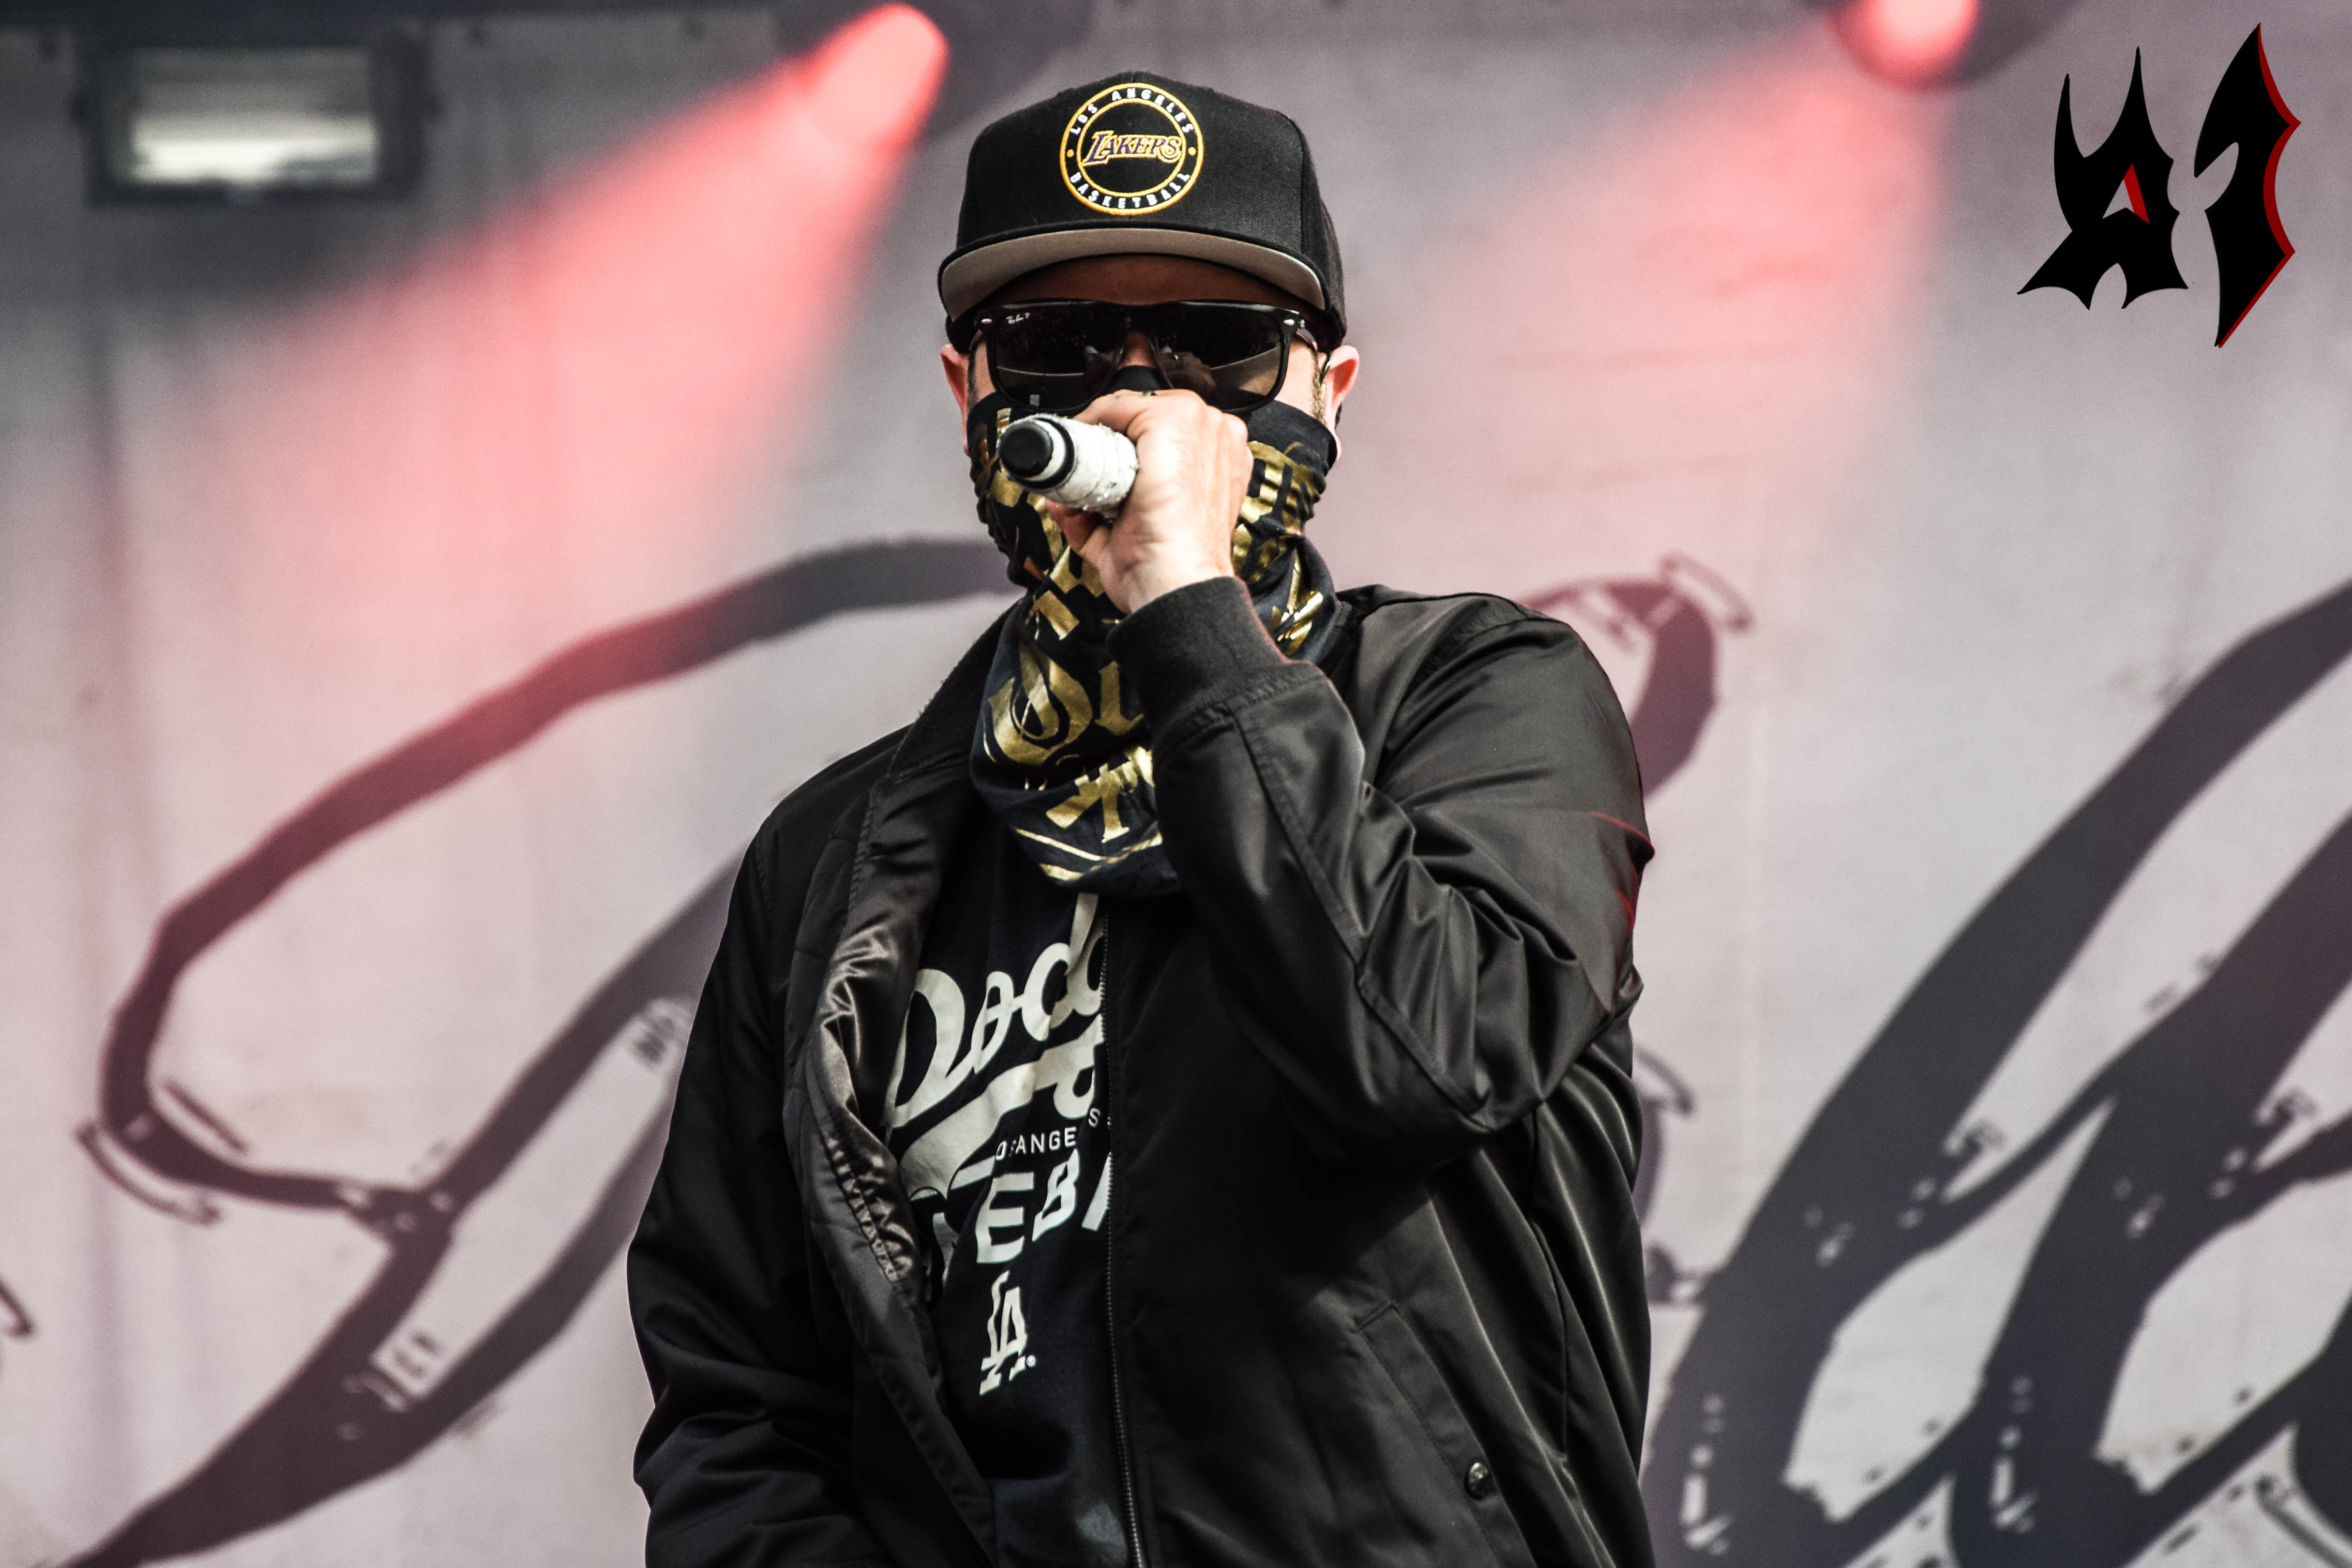 Donwload 2018 – Day 2 - Hollywood Undead 21